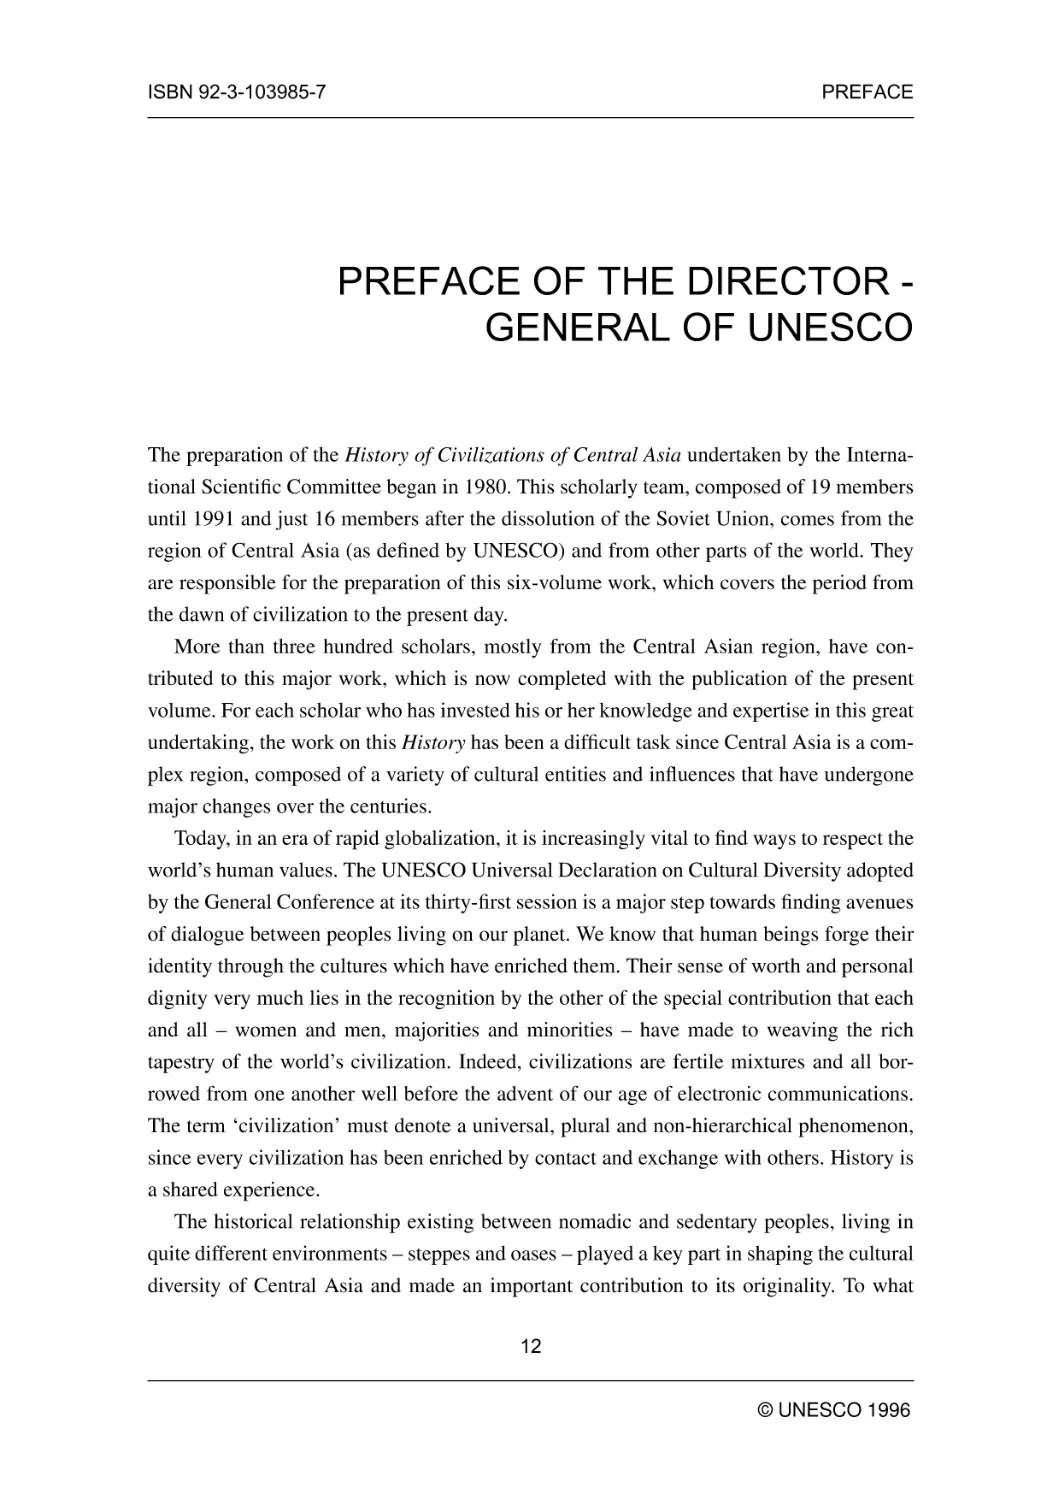 PREFACE OF THE DIRECTOR - GENERAL OF UNESCO